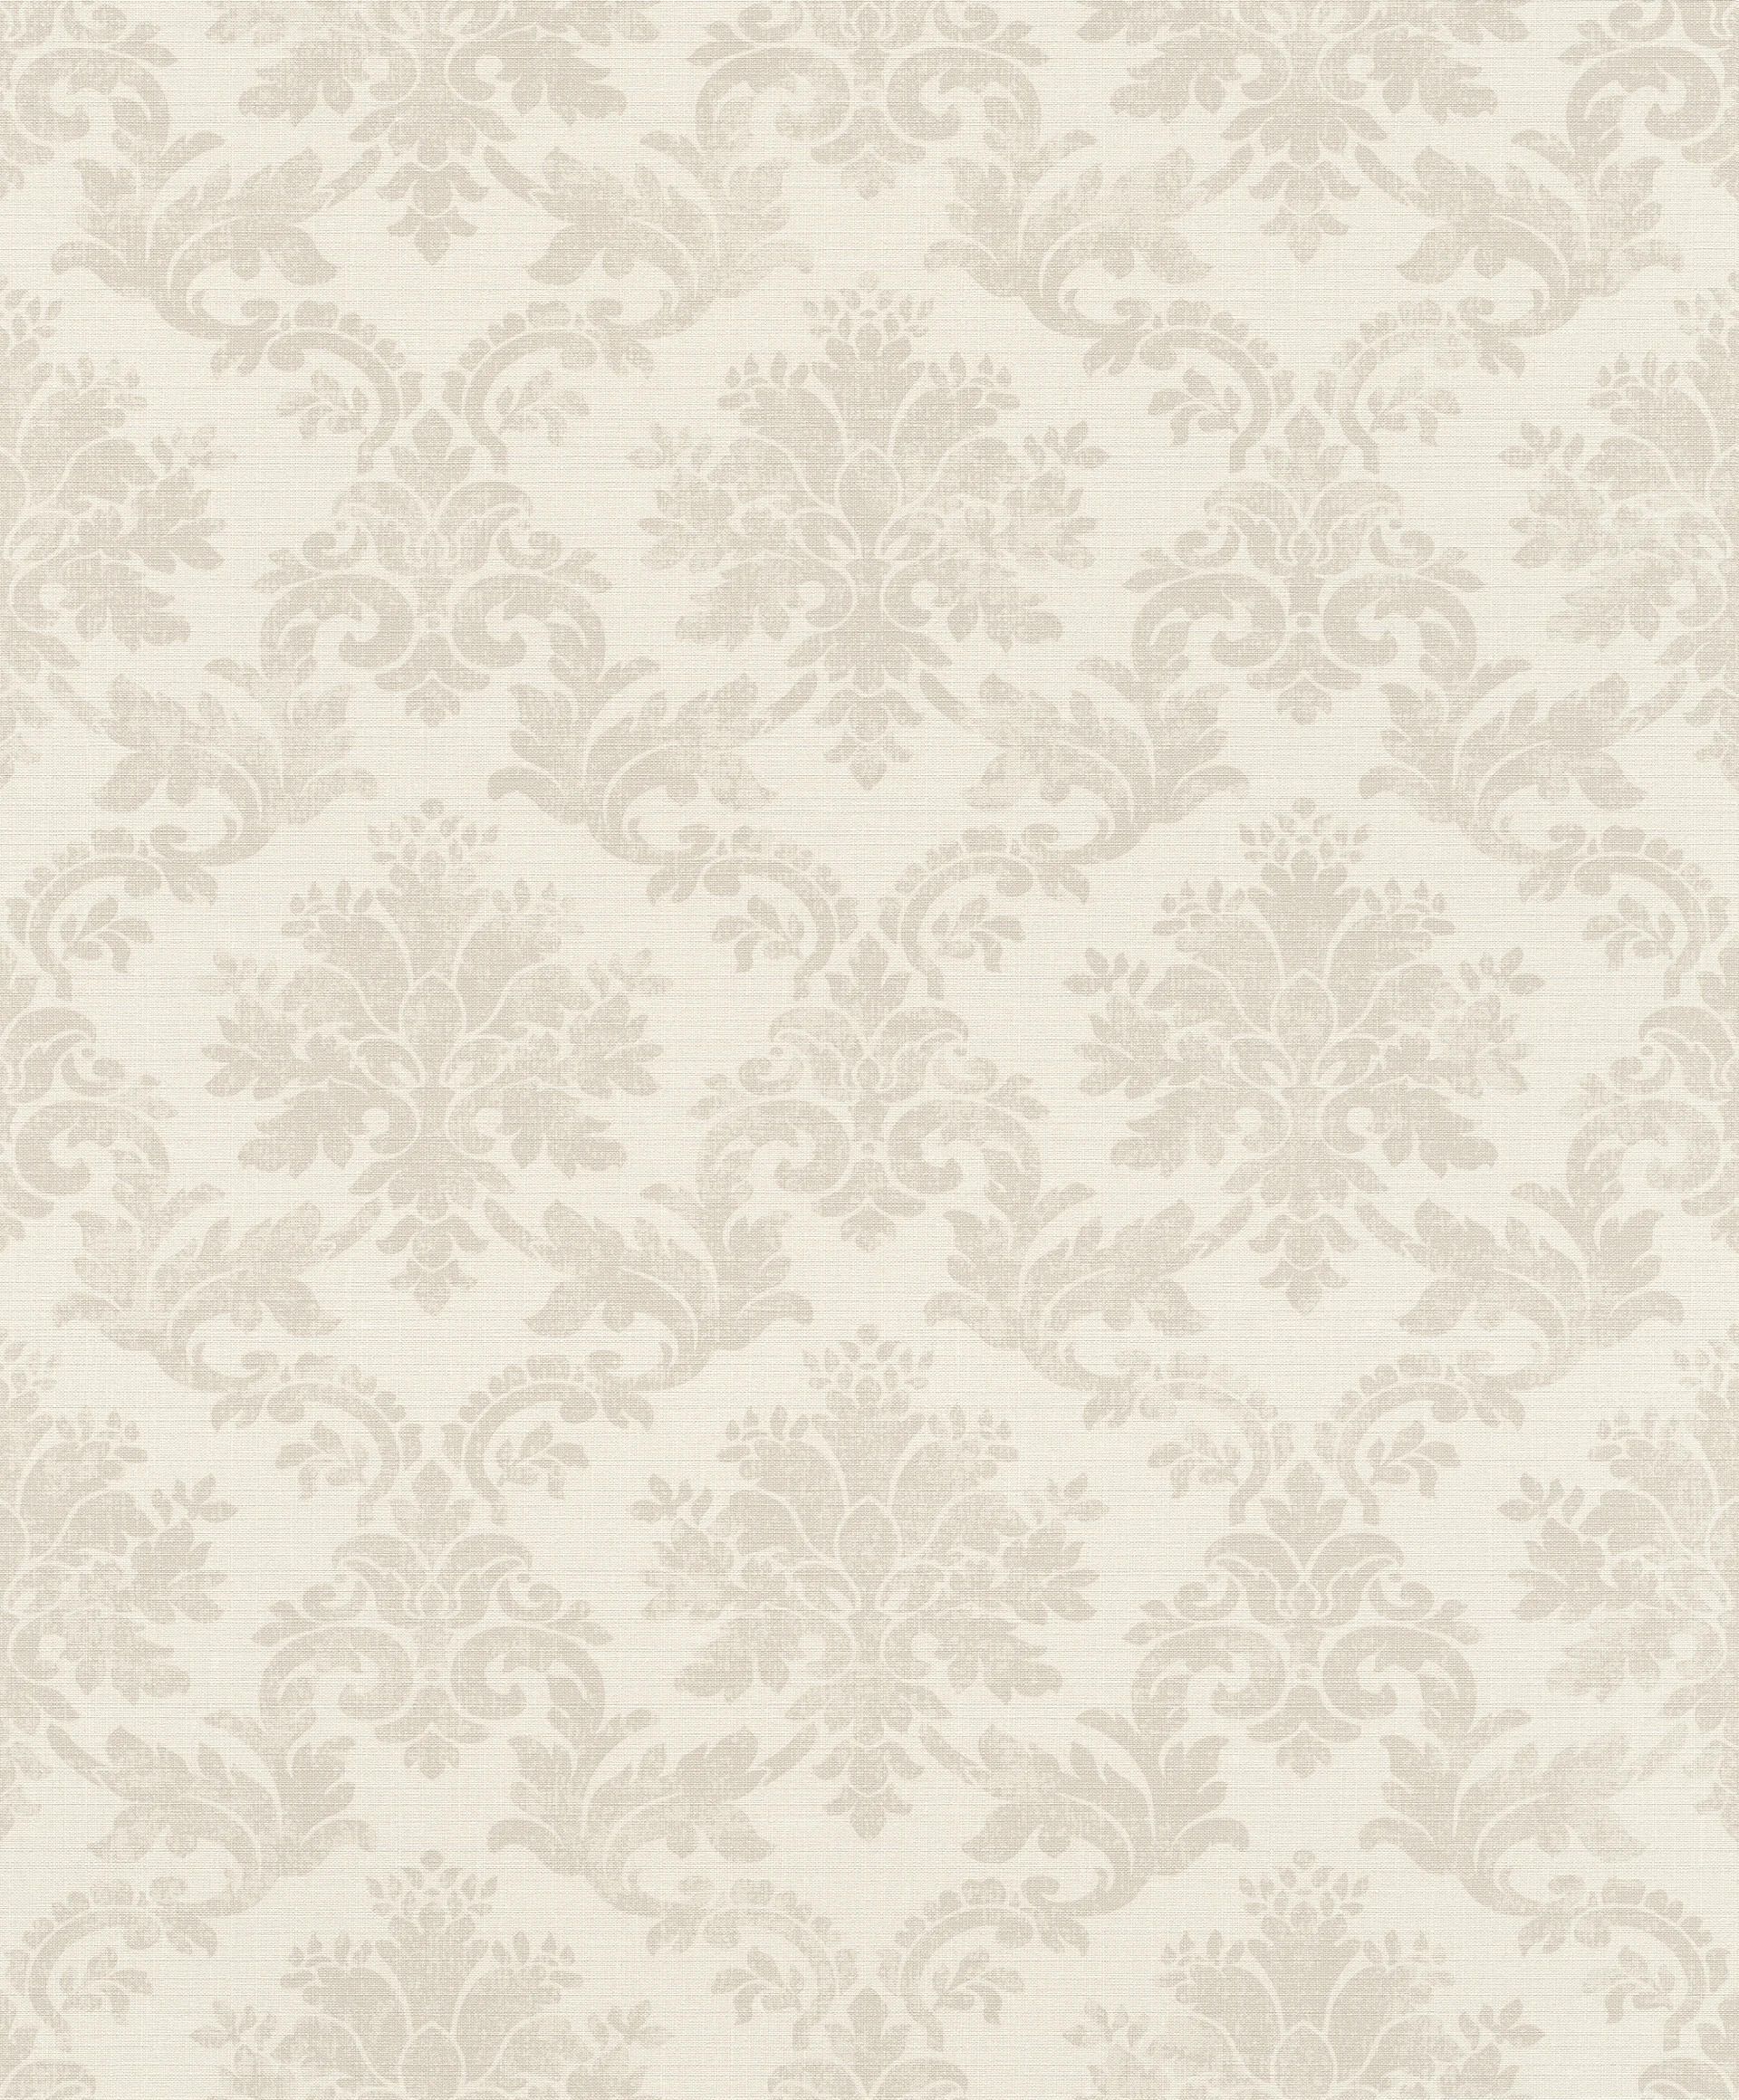 Rasch Selection, Classic-Chic, beige creme 401424